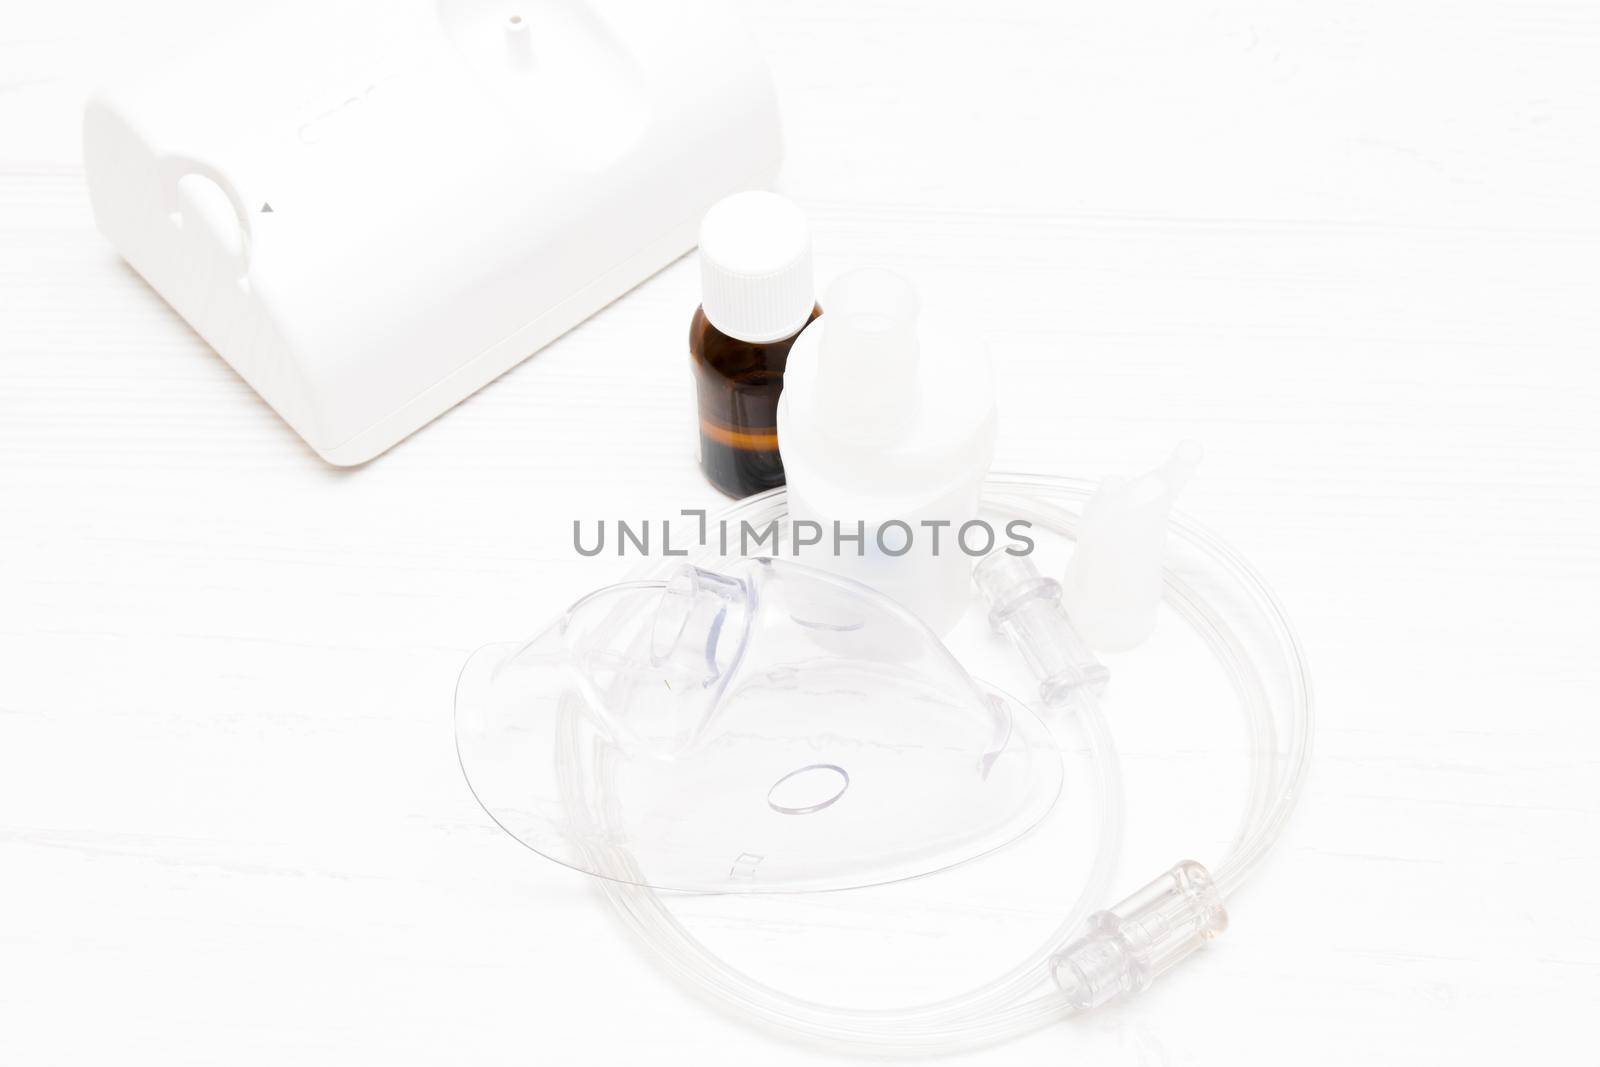 inhaler, tube and mask with a large palat on a light background, copy space, medicine in a dark bottle for inhalation, respiratory diseases concept, top view